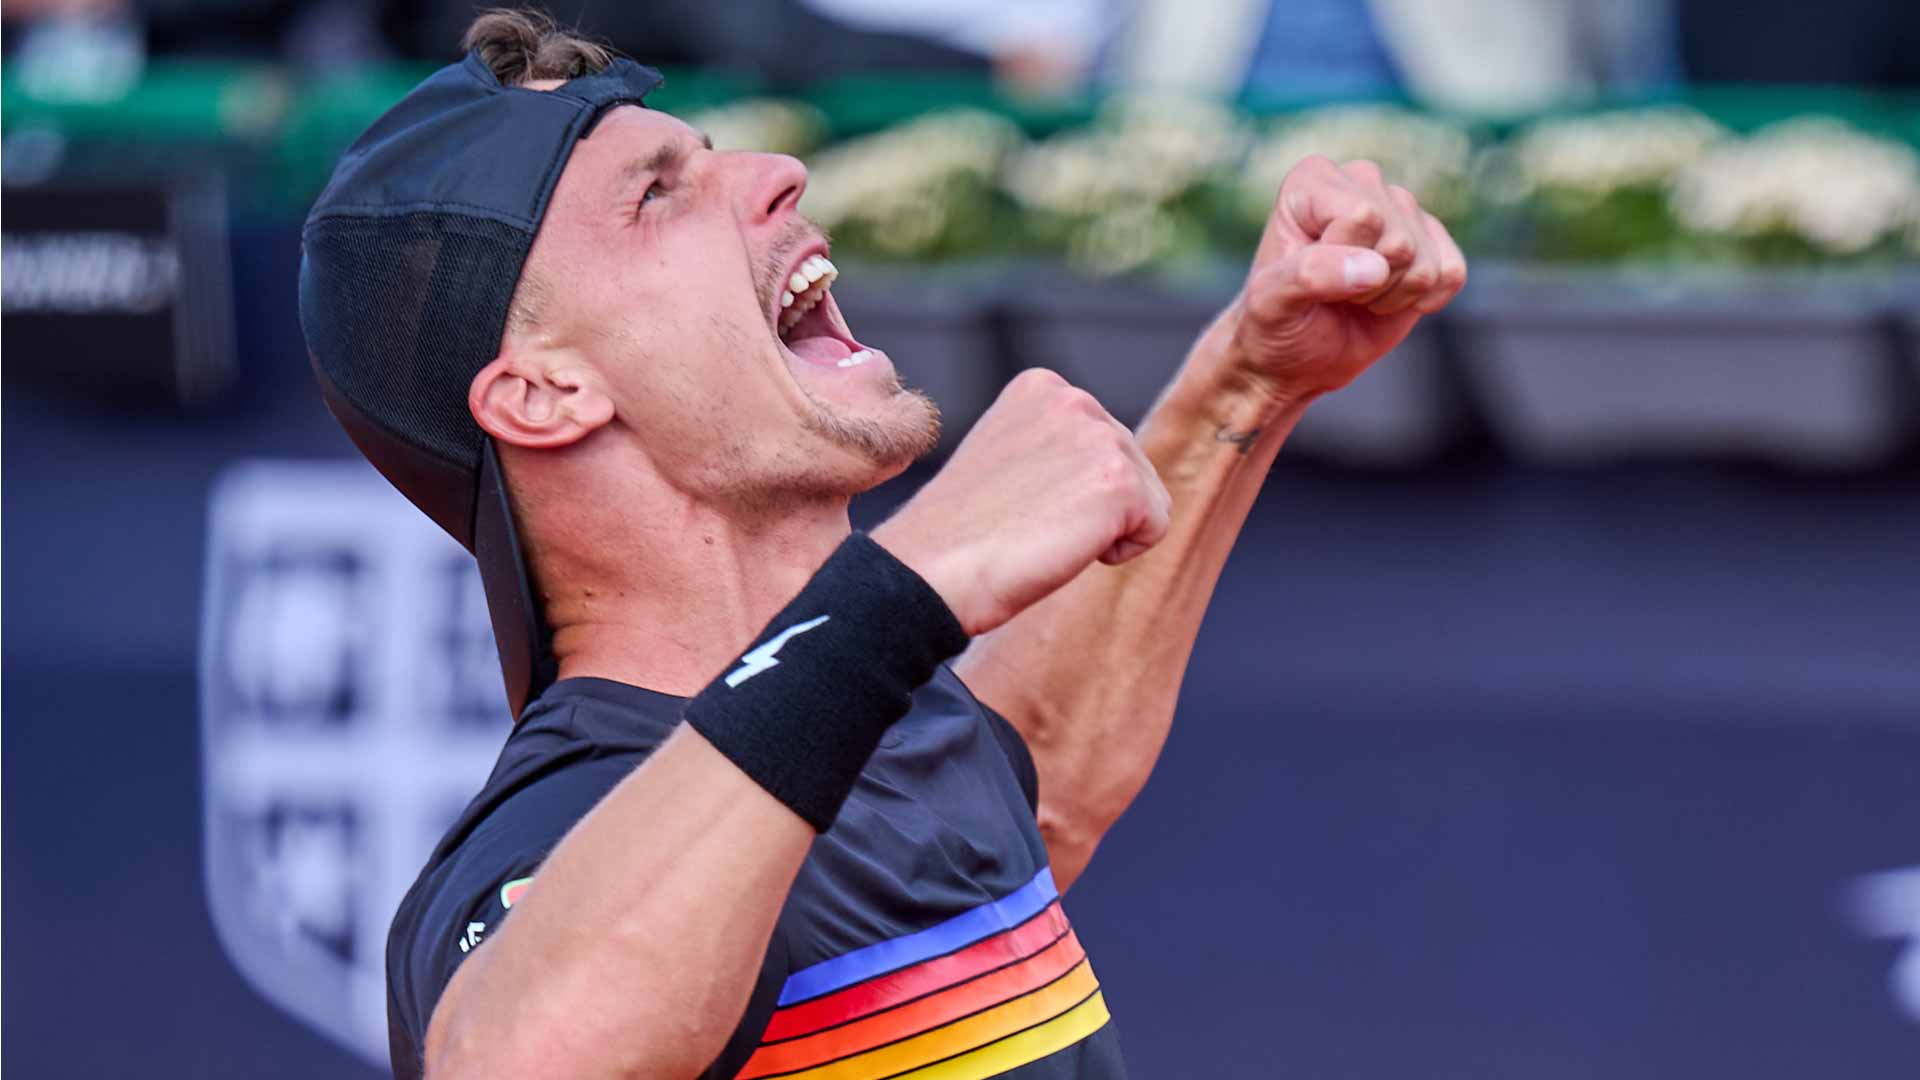 Fucsovics triumphs in Bucharest for first title since 2018